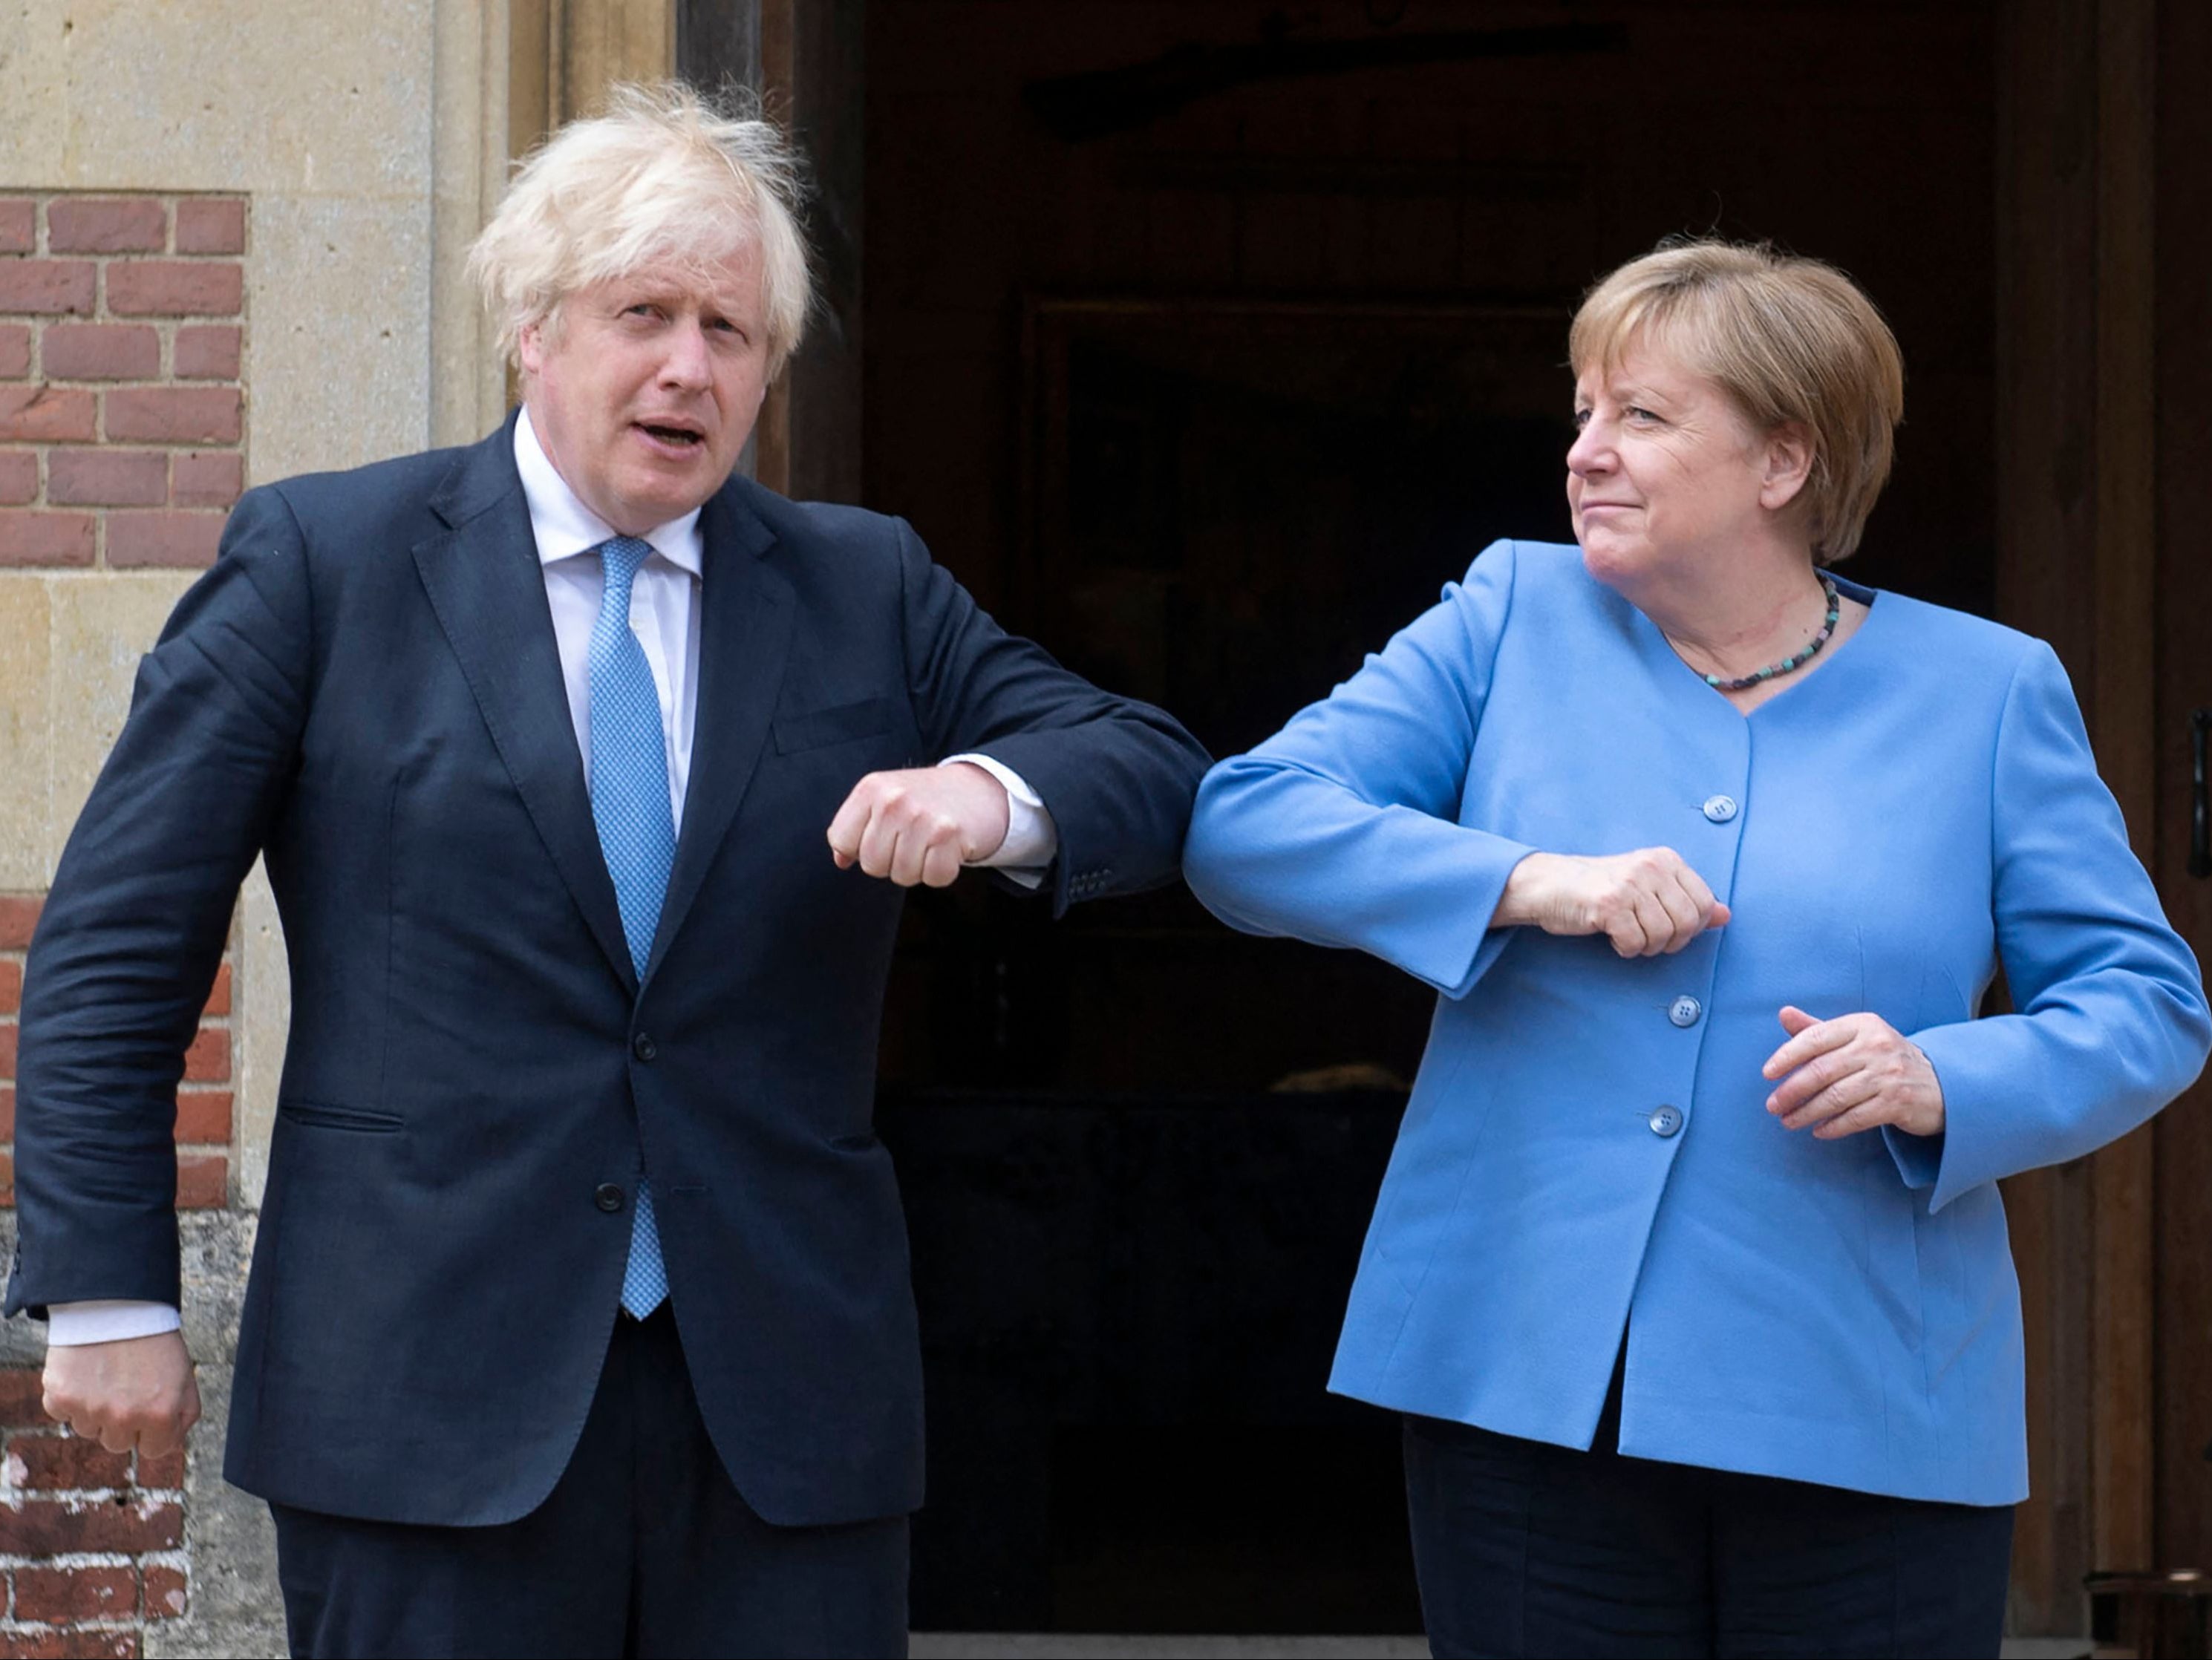 Boris Johnson welcomes German chancellor Angela Merkel to Chequers with an elbow bump on Friday